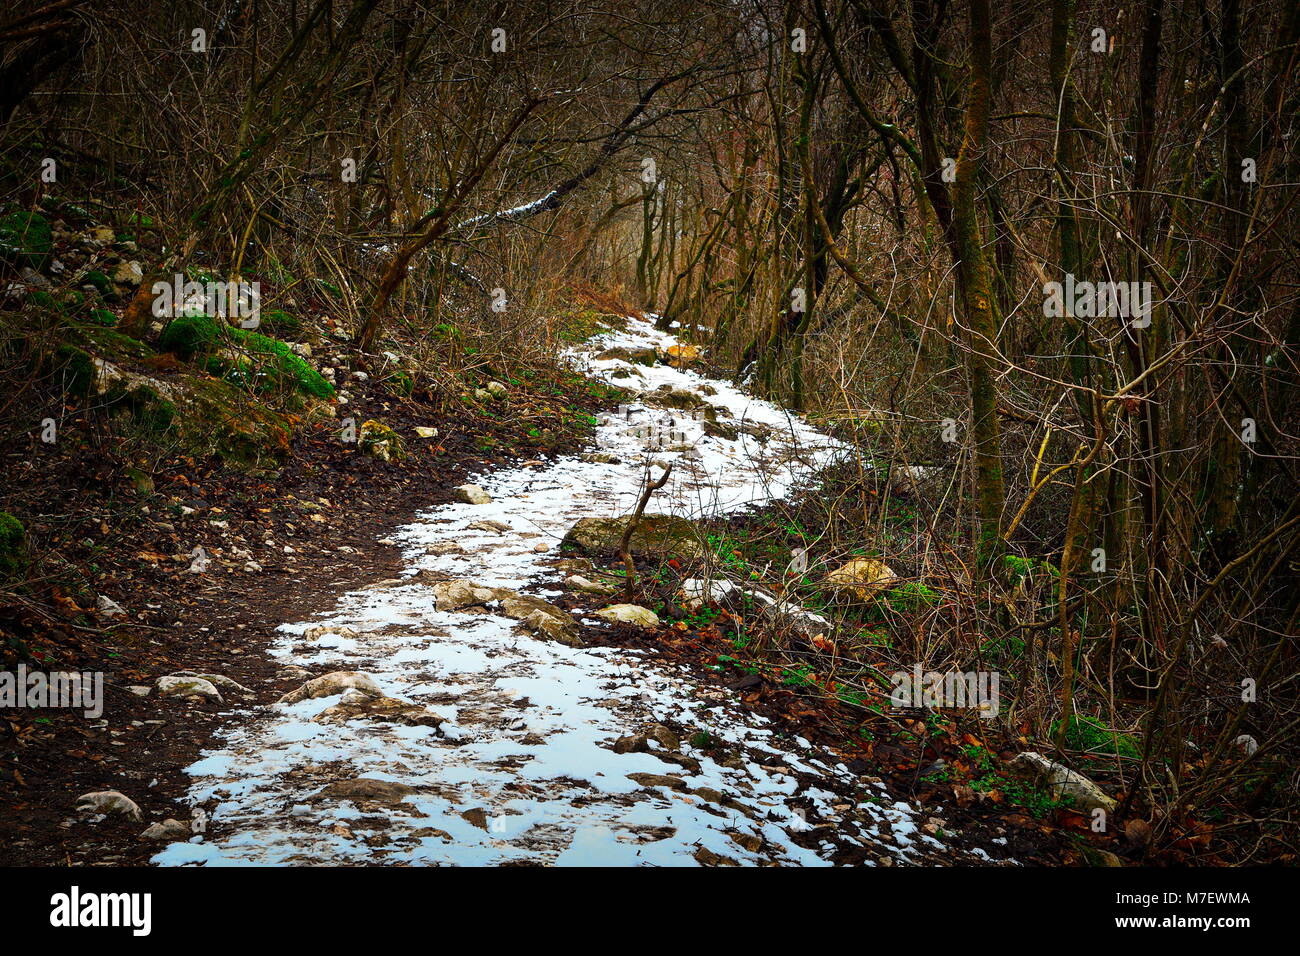 pedestrian path in the forest, winter scene in an overcast day Stock Photo